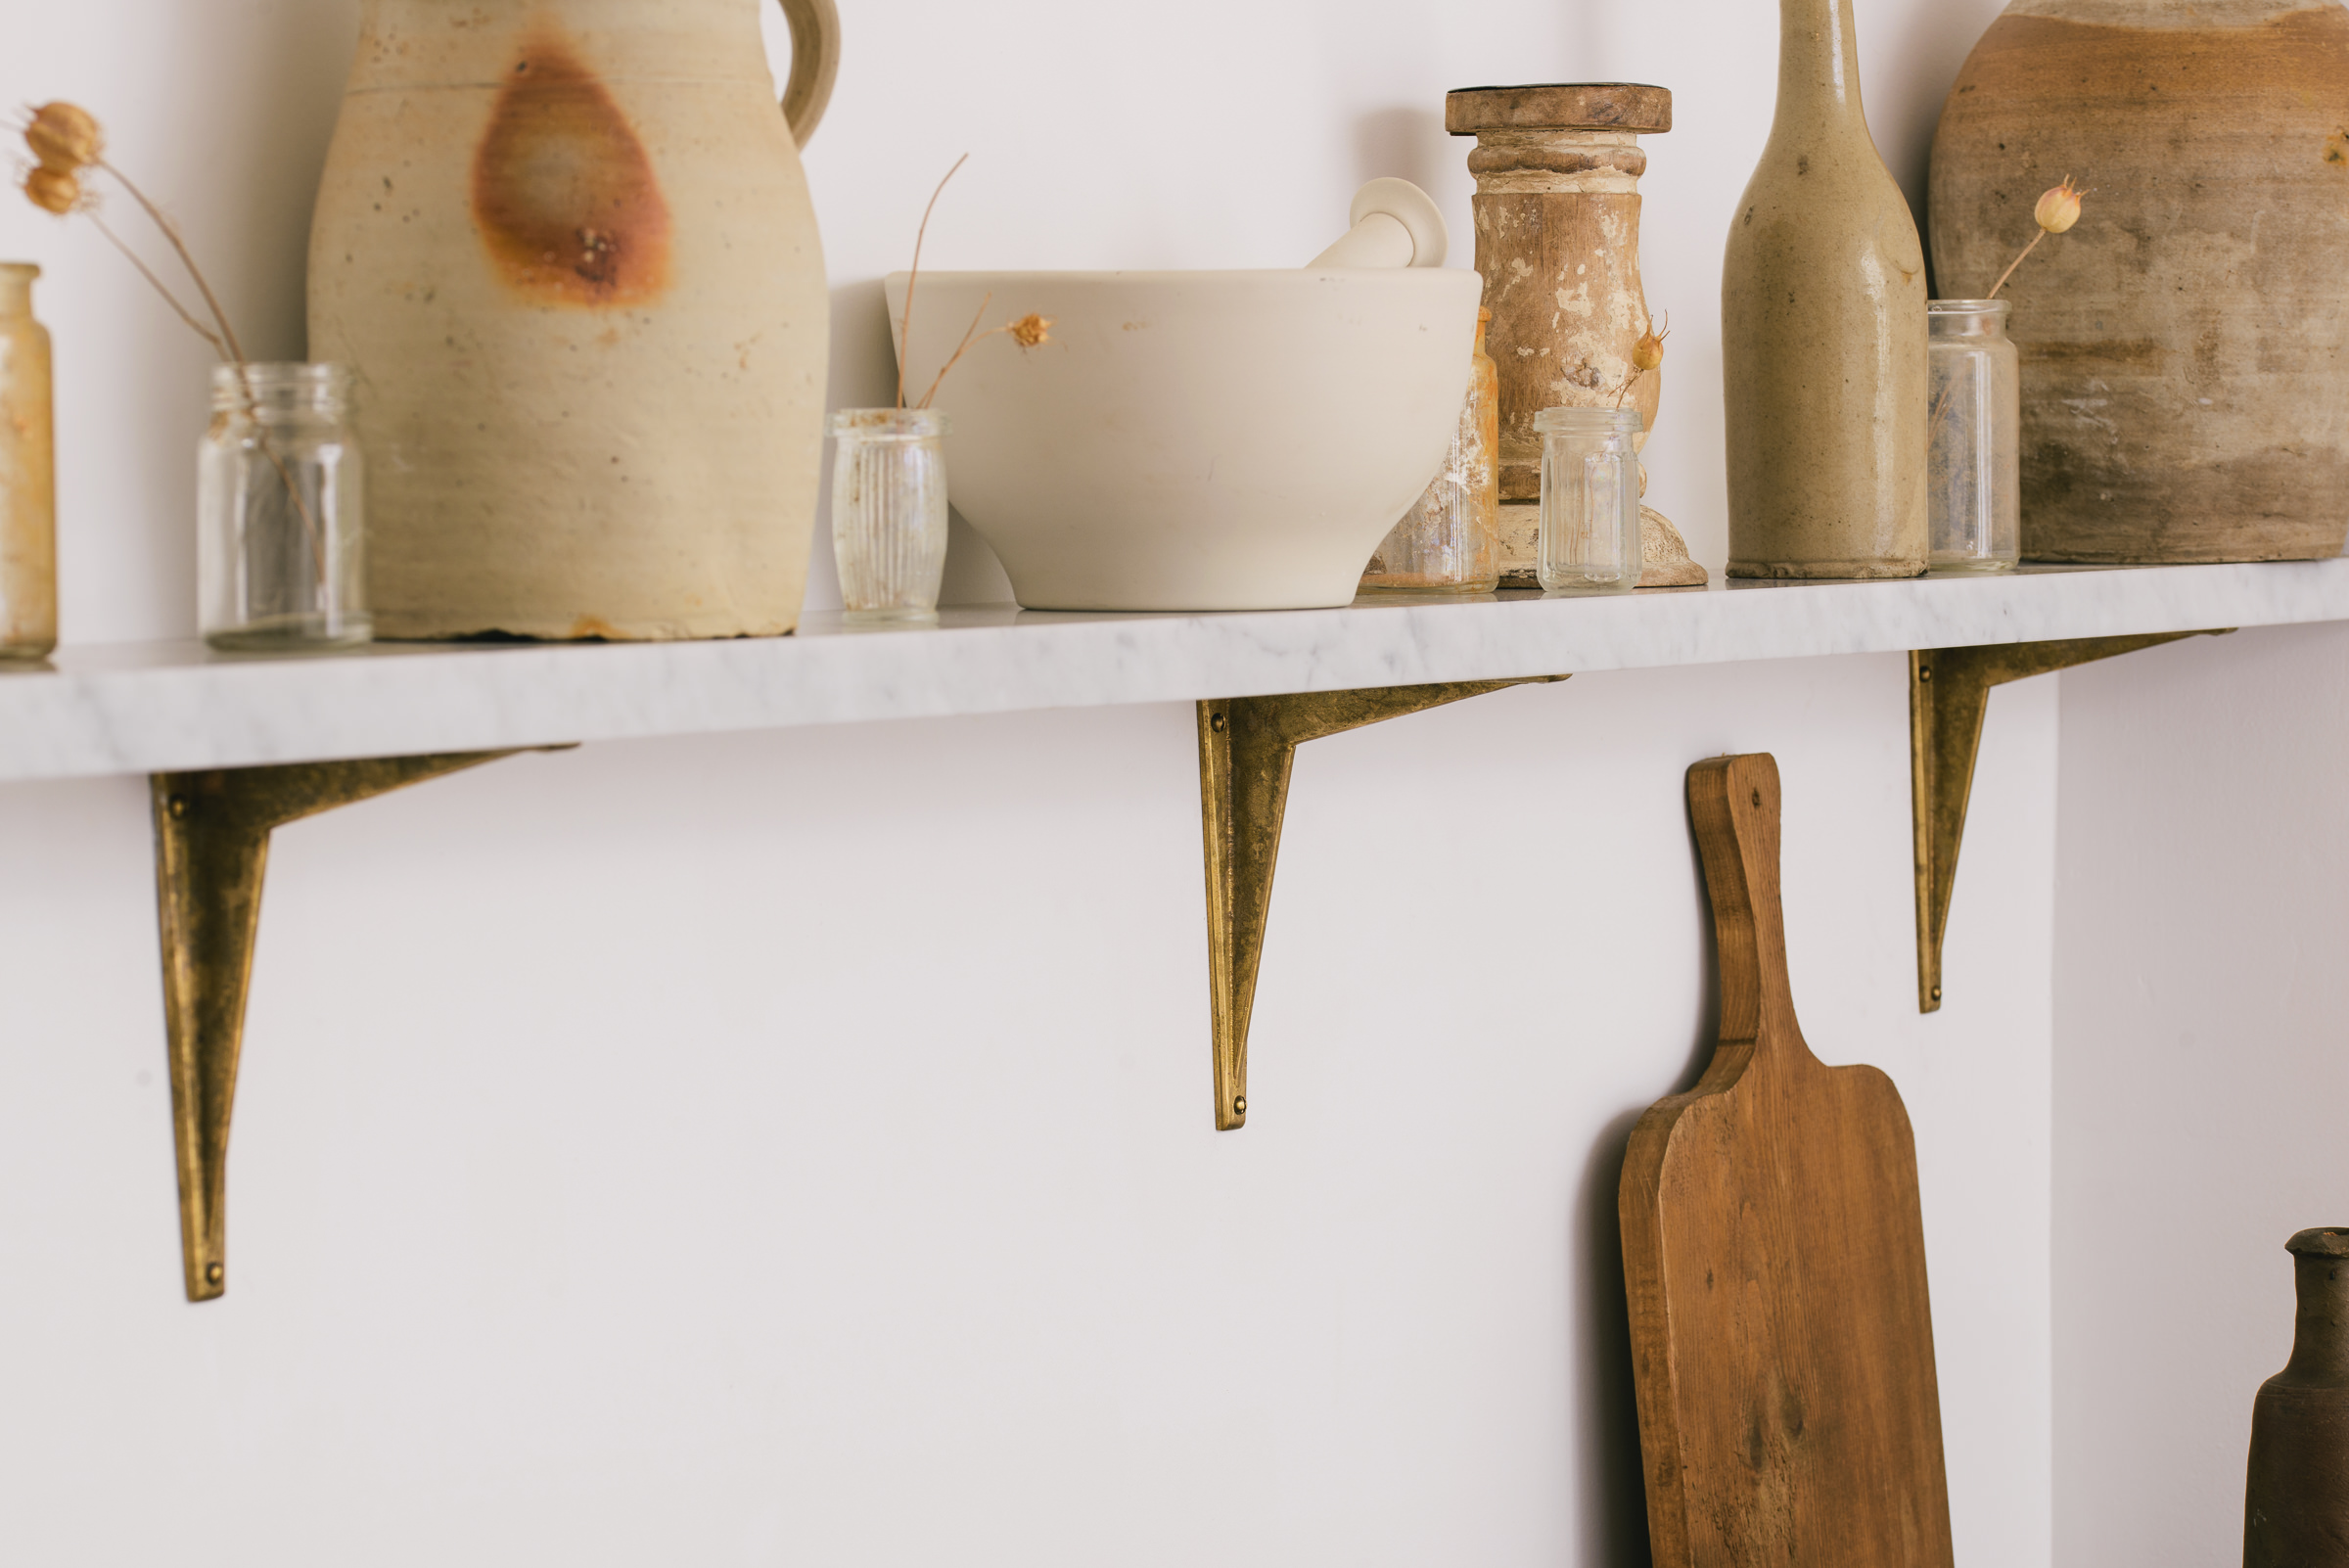 Our Aged Brass Shelf Brackets looking lovely in the Millhouse Scullery